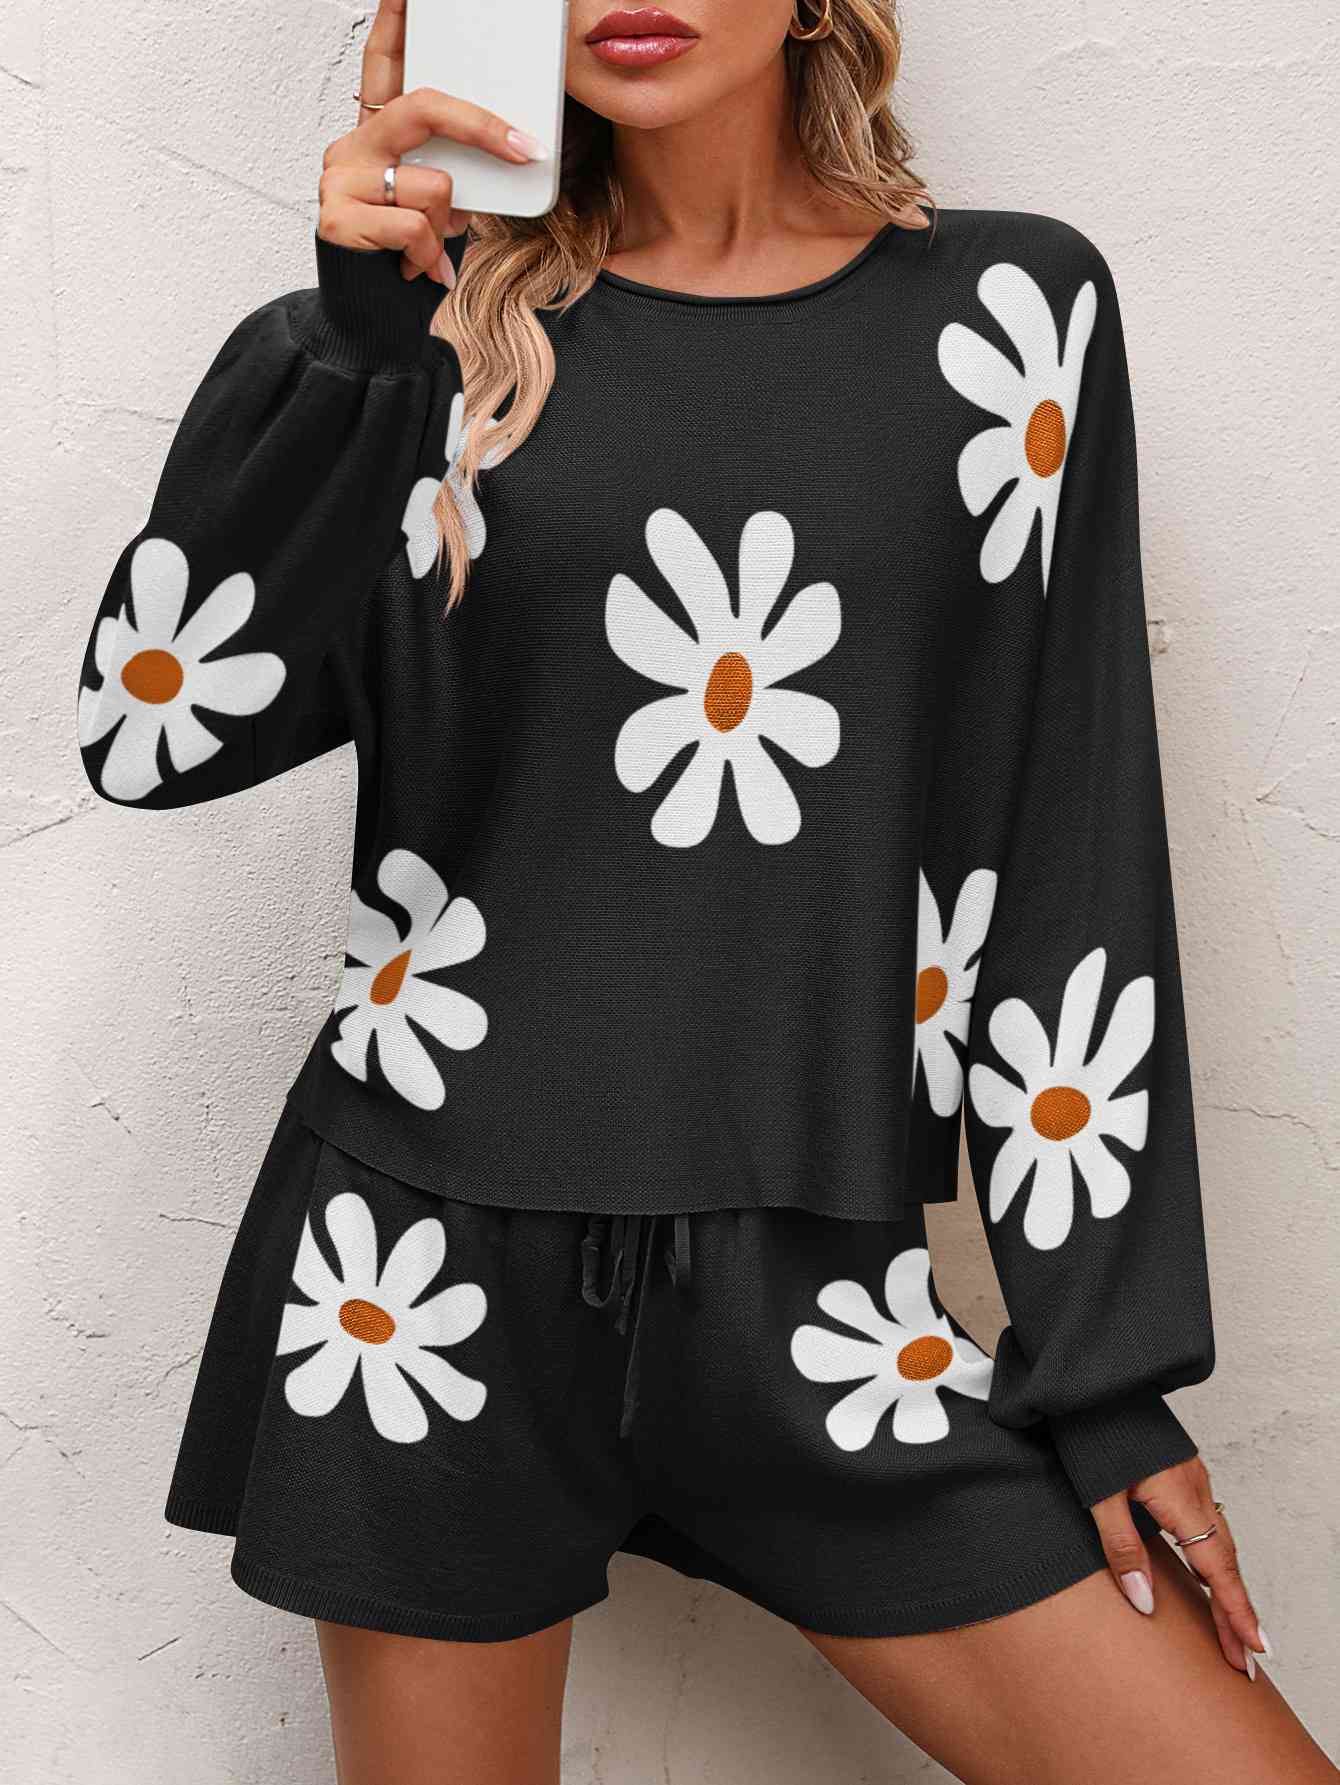 Women's Floral Print Raglan Sleeve Knit Top and Tie Front Sweater Shorts Set Black